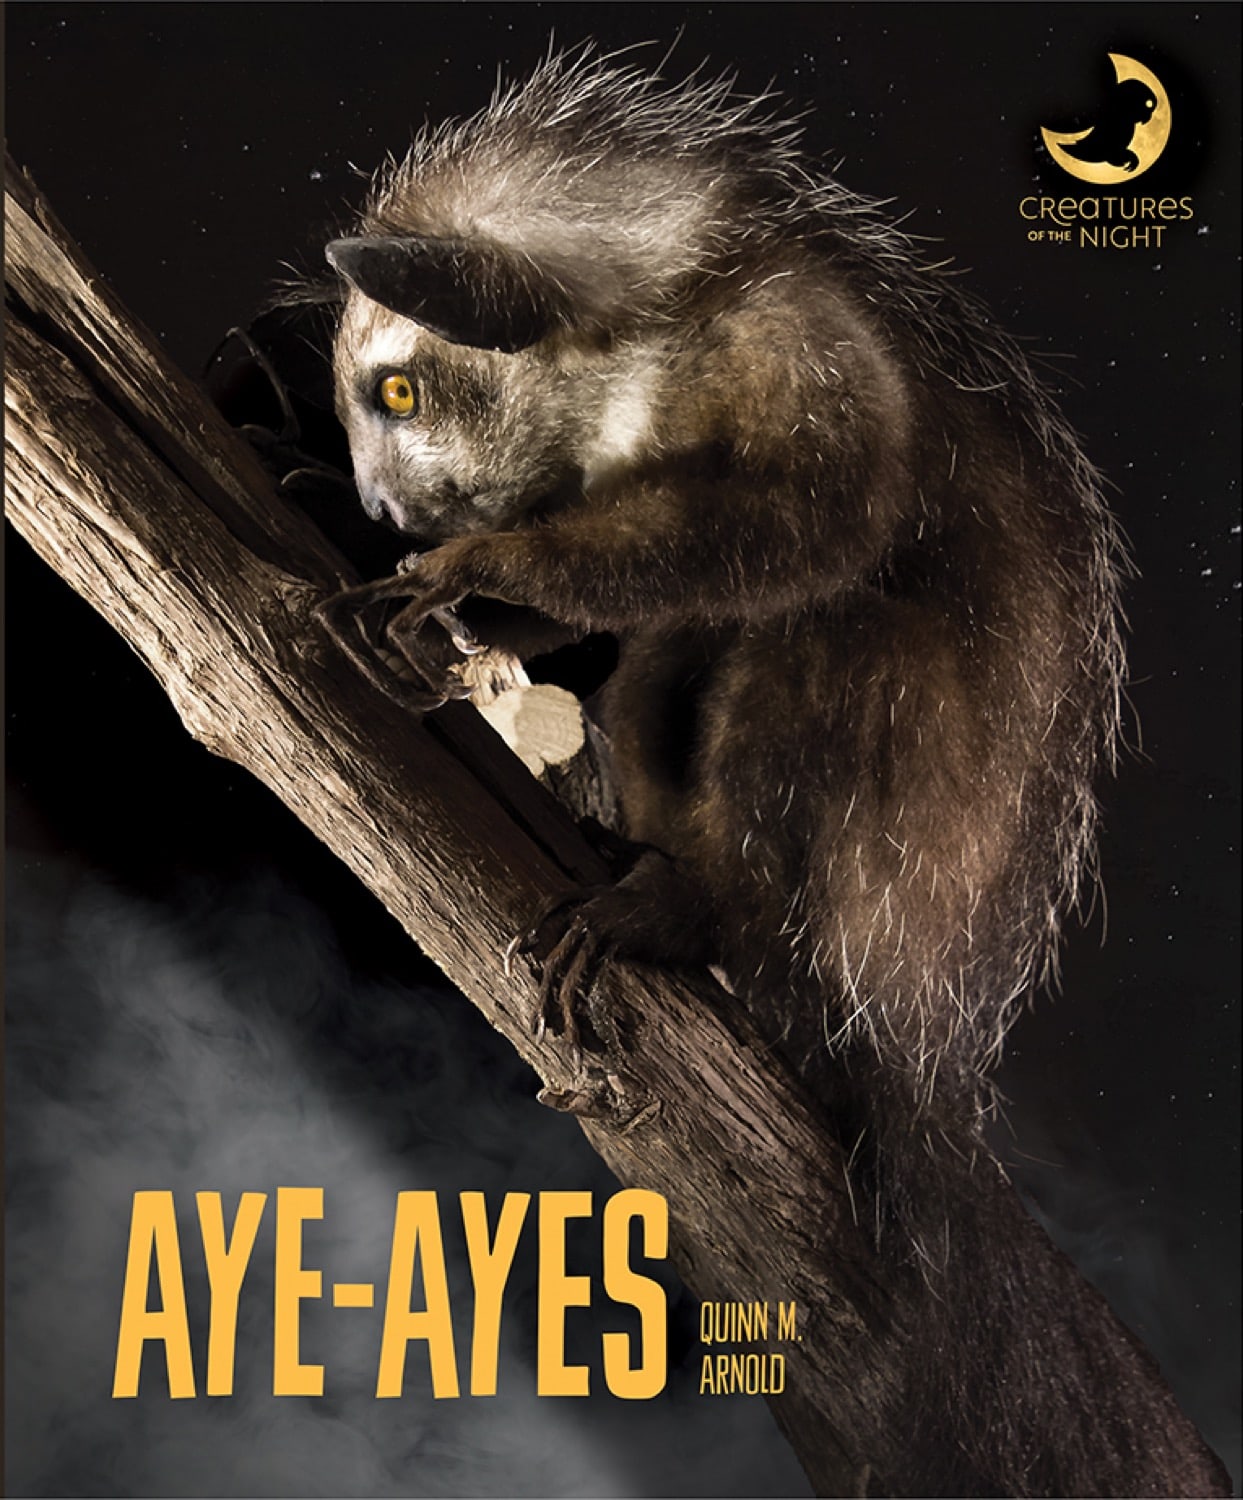 Creatures of the Night: Aye-ayes